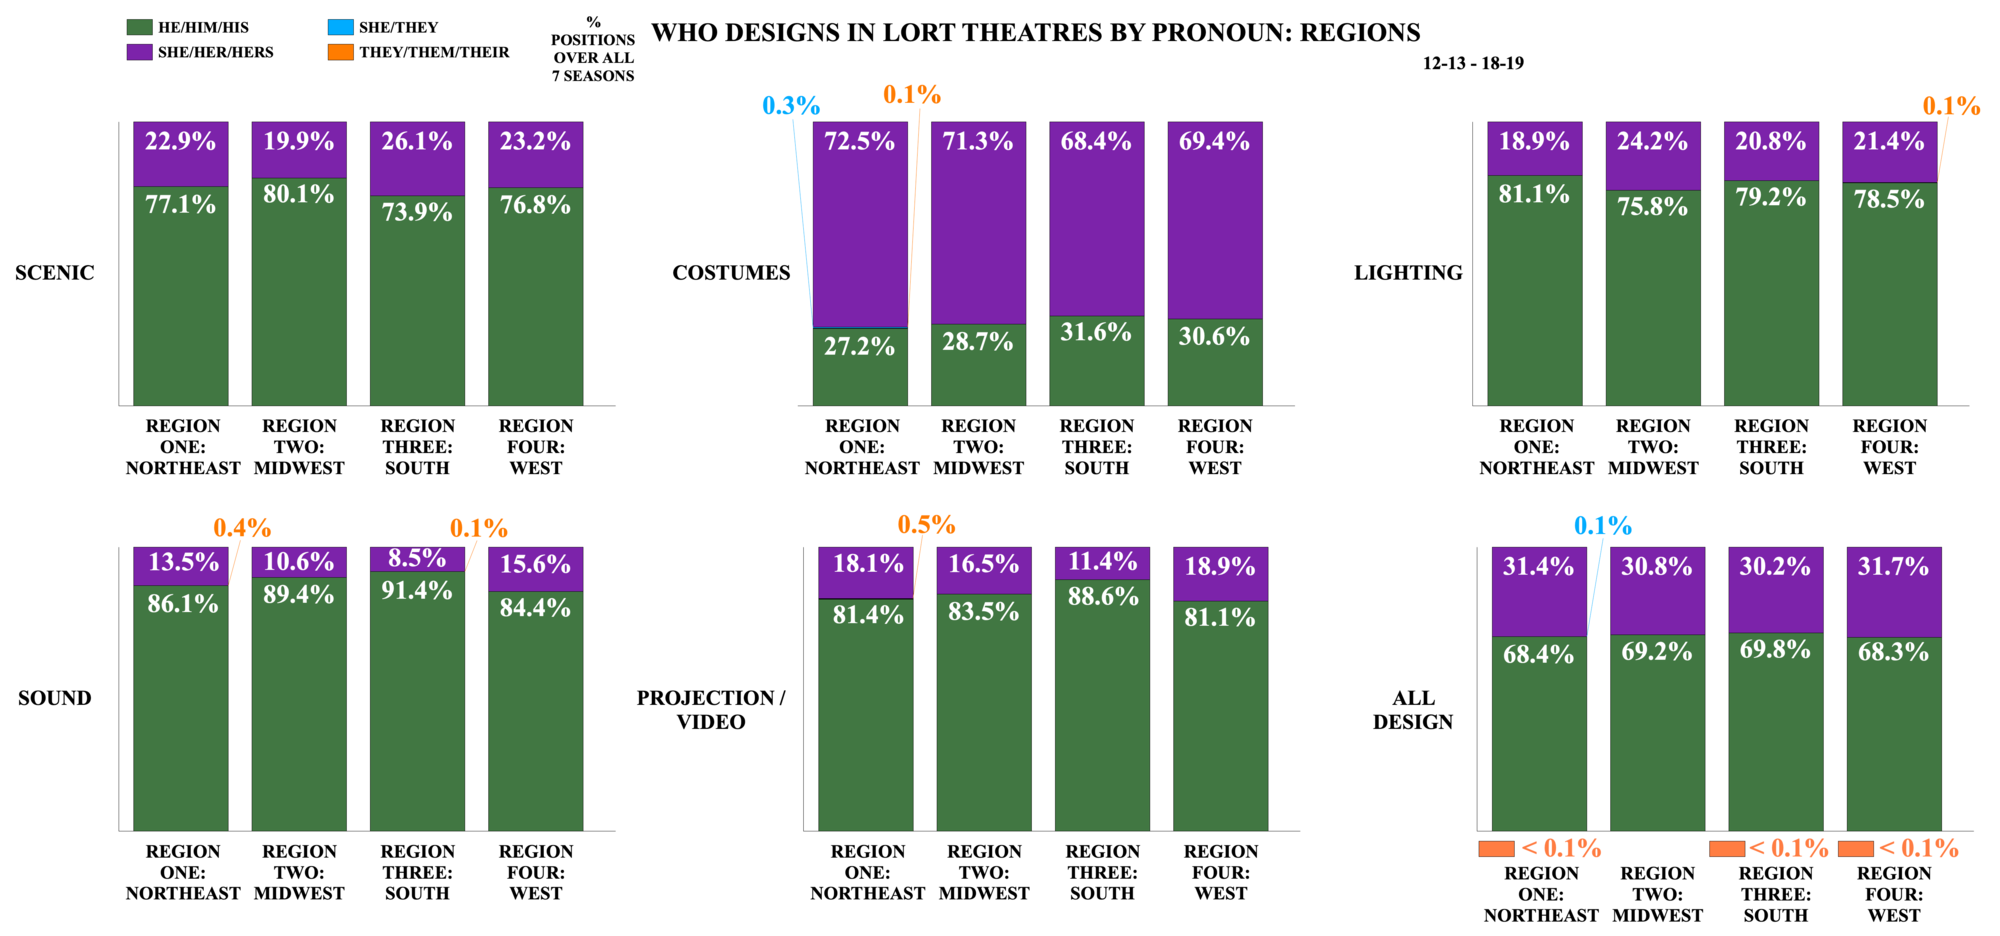 Who Designs in LORT Theatres by Pronoun: Region